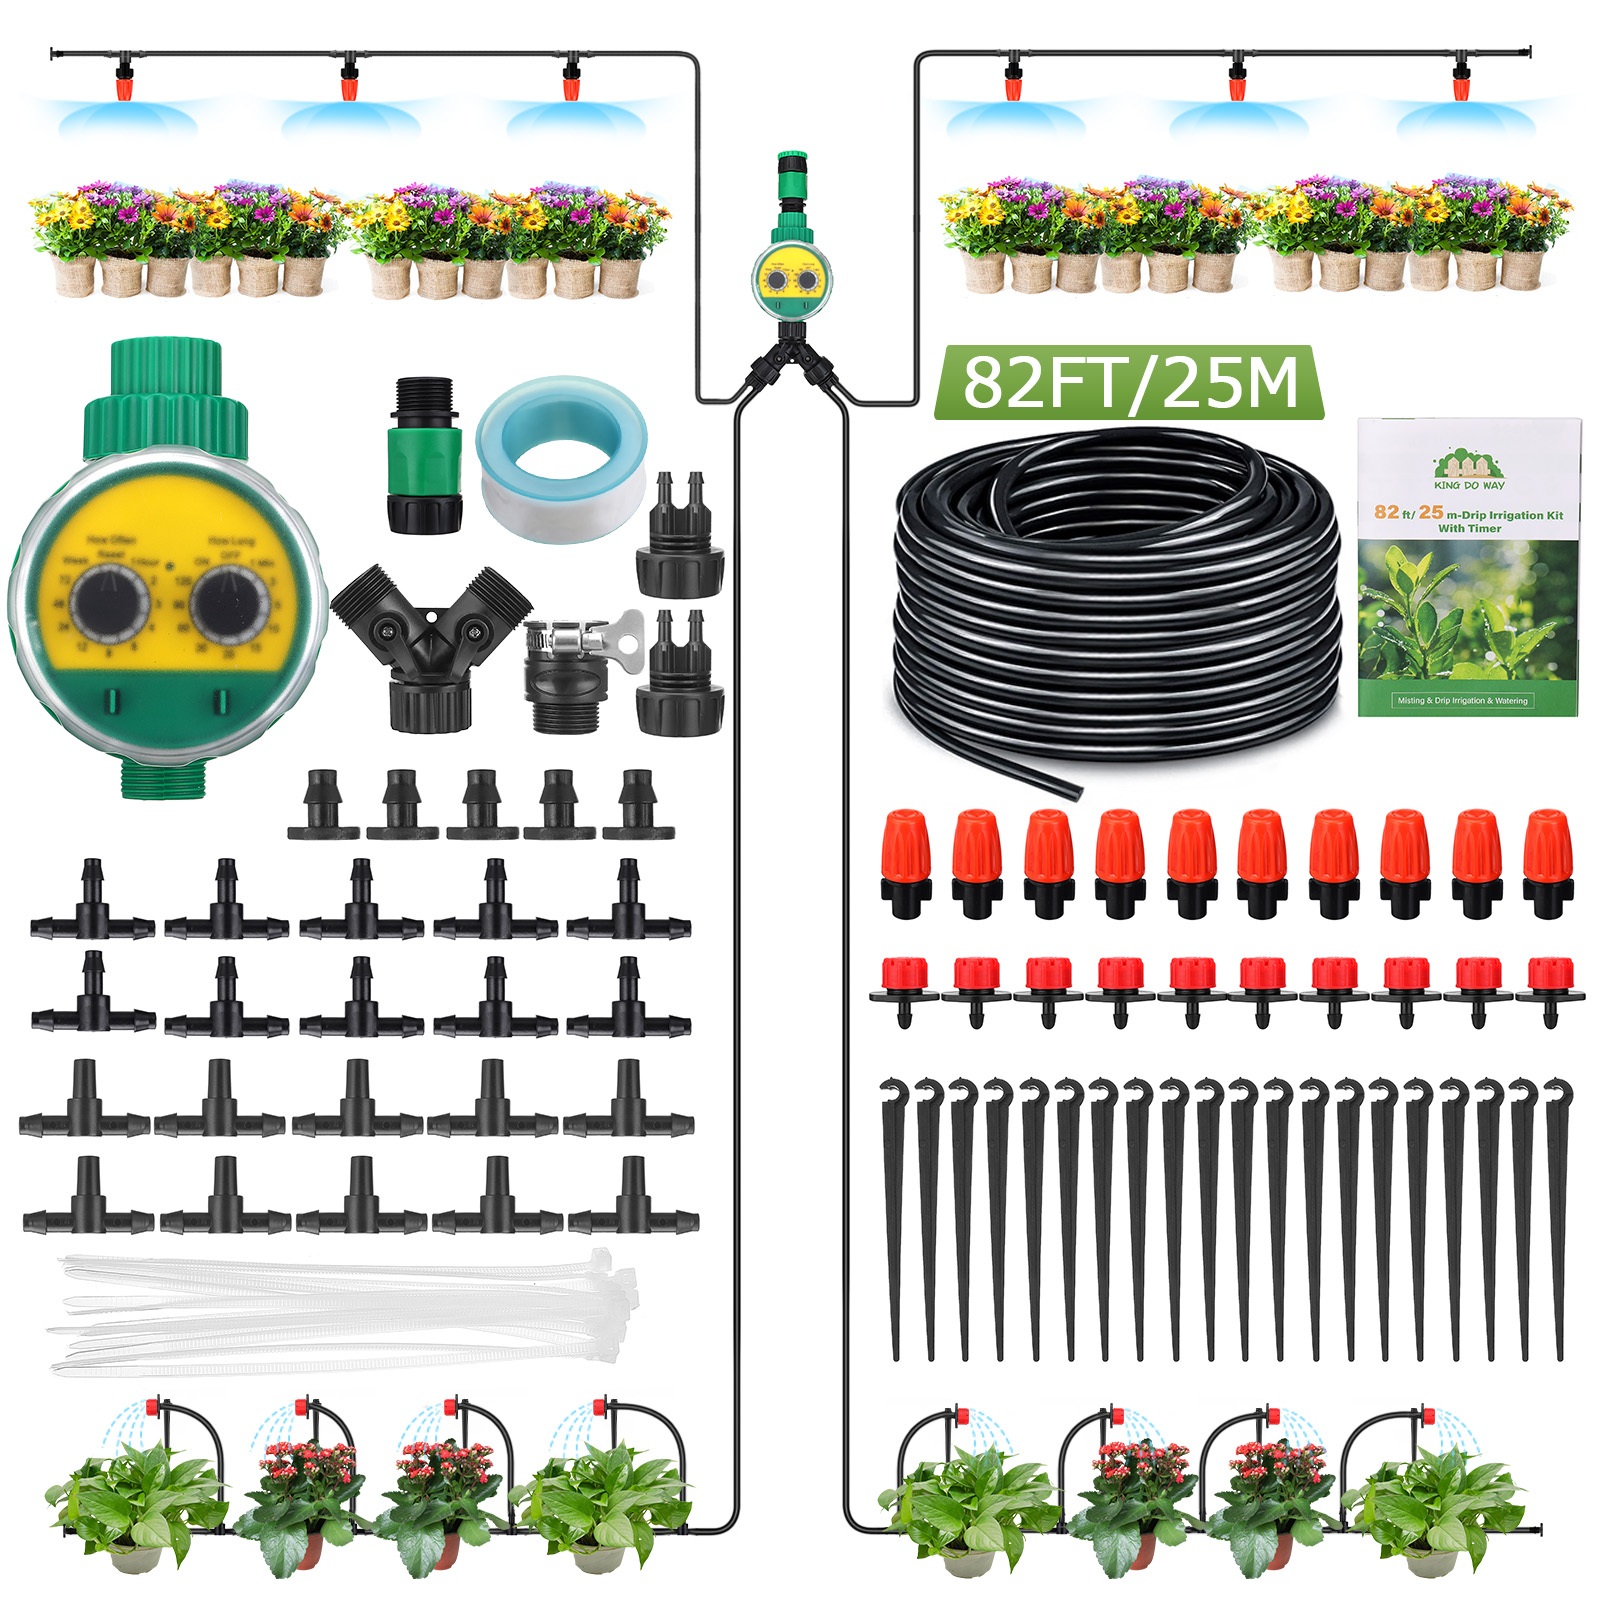 KING-DO-WAY-Drip-Irrigation-Kit-with-Water-Timer-Water-Pipe-and-Full-Language-Manual-and-Other-Acces-1829777-2